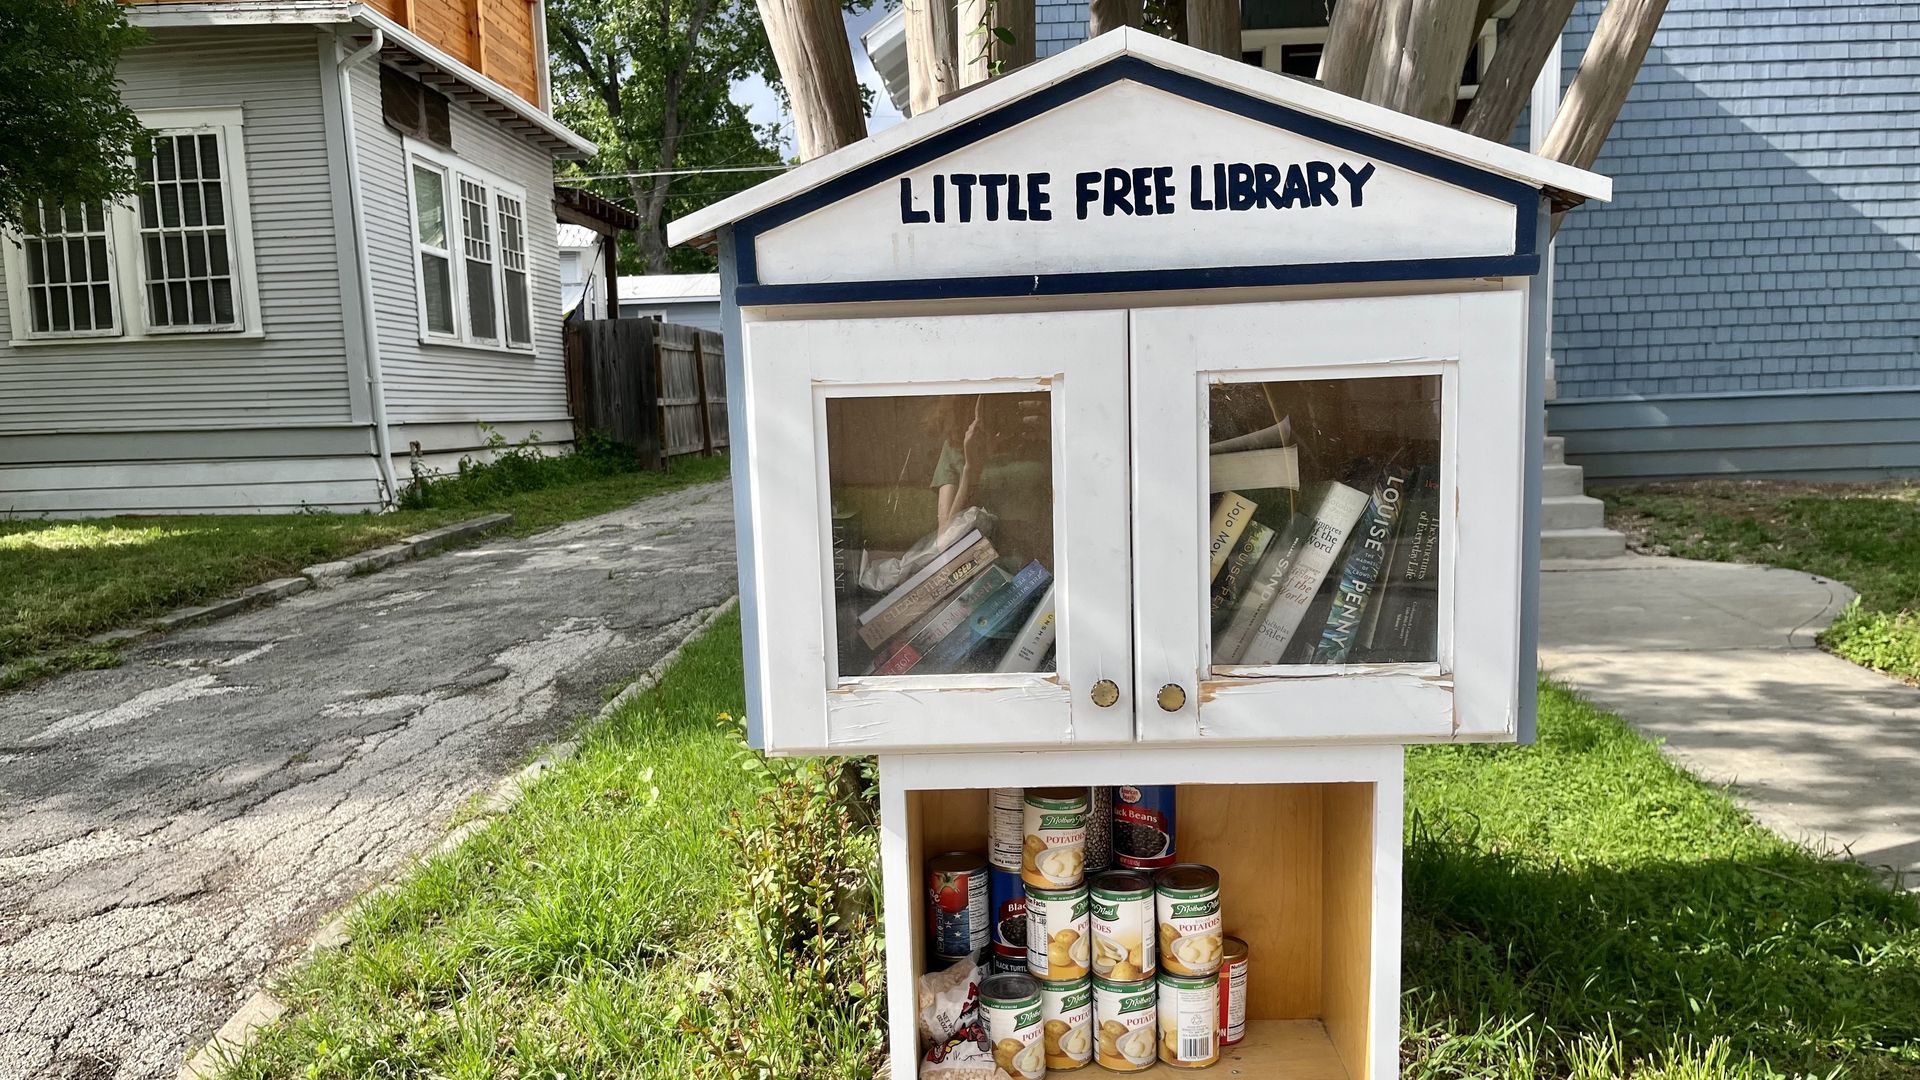 A little free library with a pointed roof, glass doors for the book case and an open area with canned food on the bottom.